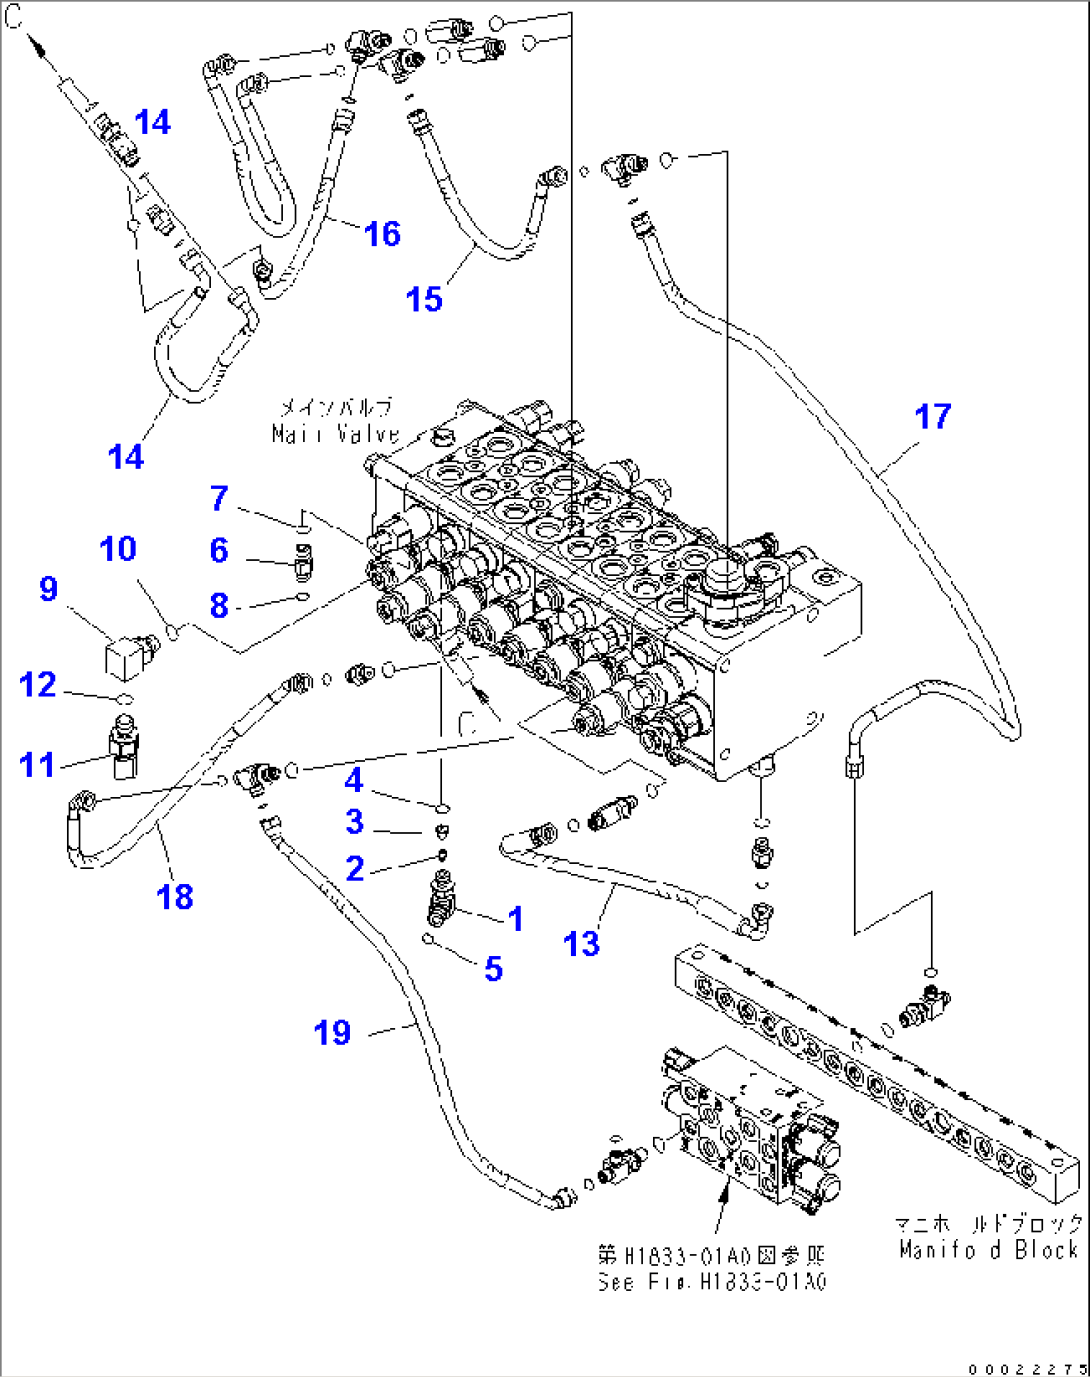 MAIN VALVE CONNECTING PARTS (4/4)